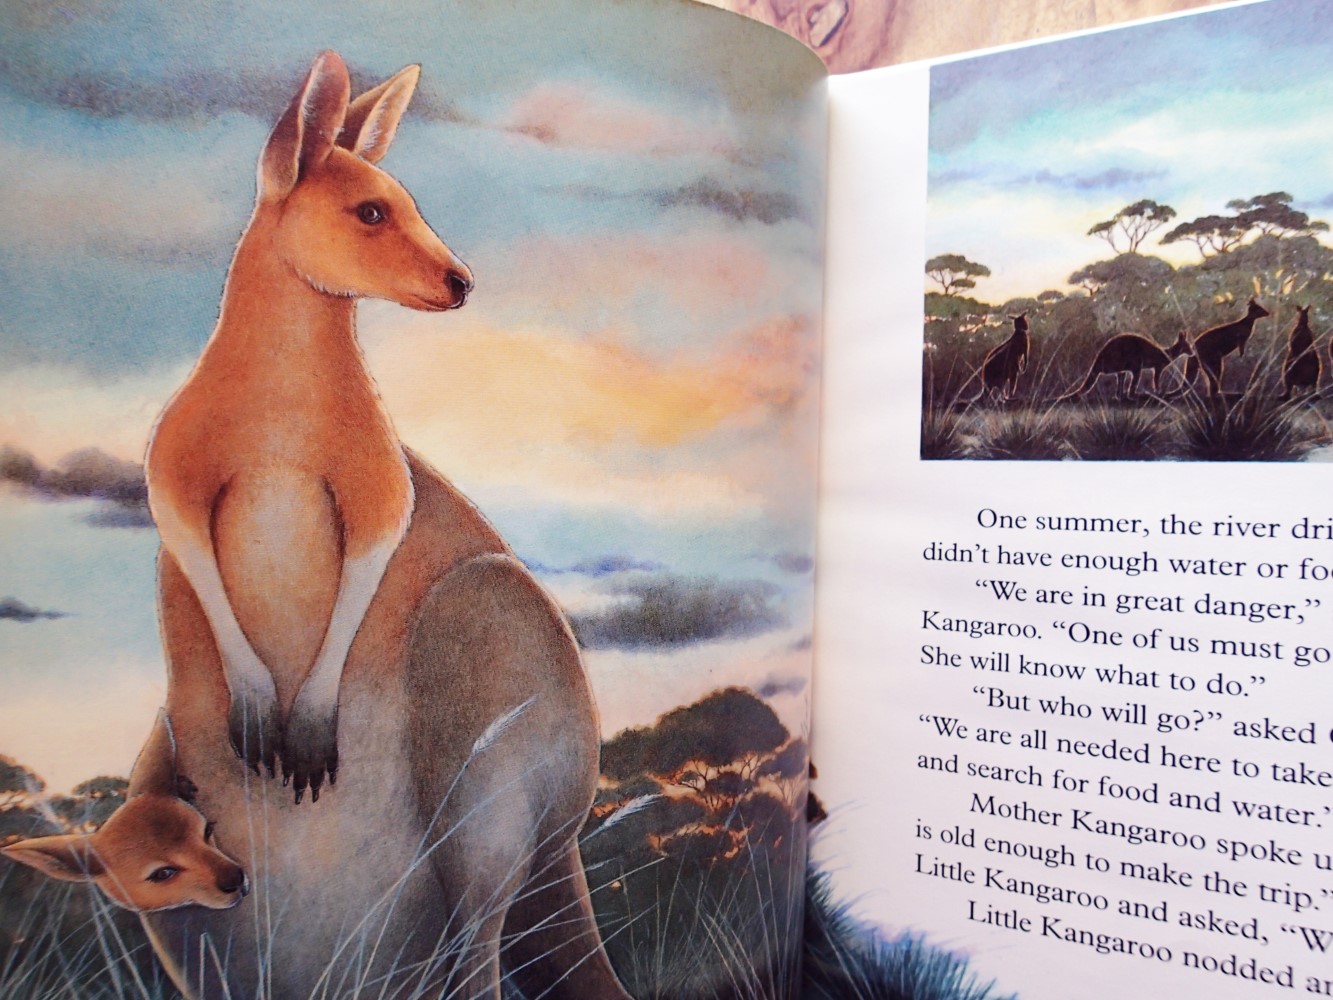 LITTLE KANGAROO FINDS HIS WAY : (English edition of KANGOUROU, PETIT FOU!)  : Reader's Digest Kids, Little Animal Adventures by Ariane Chottin;  (Translated & Adapted from the French by Patricia Jensen): New